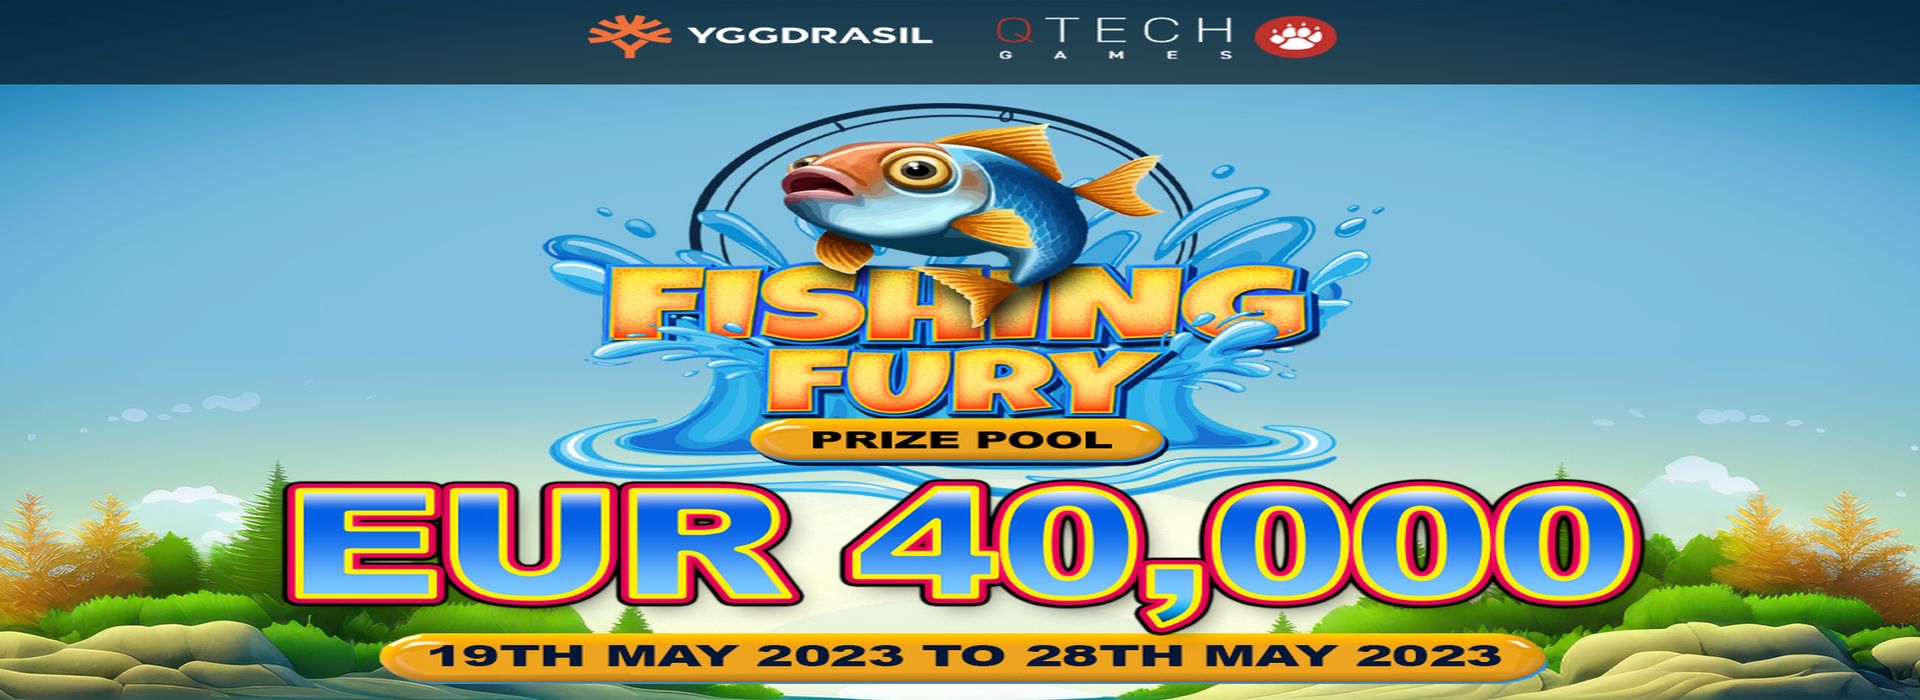 Time to reel in some wins!  Yggdrasil invites you to join the fun and exciting network tournament “Fishing Fury!”